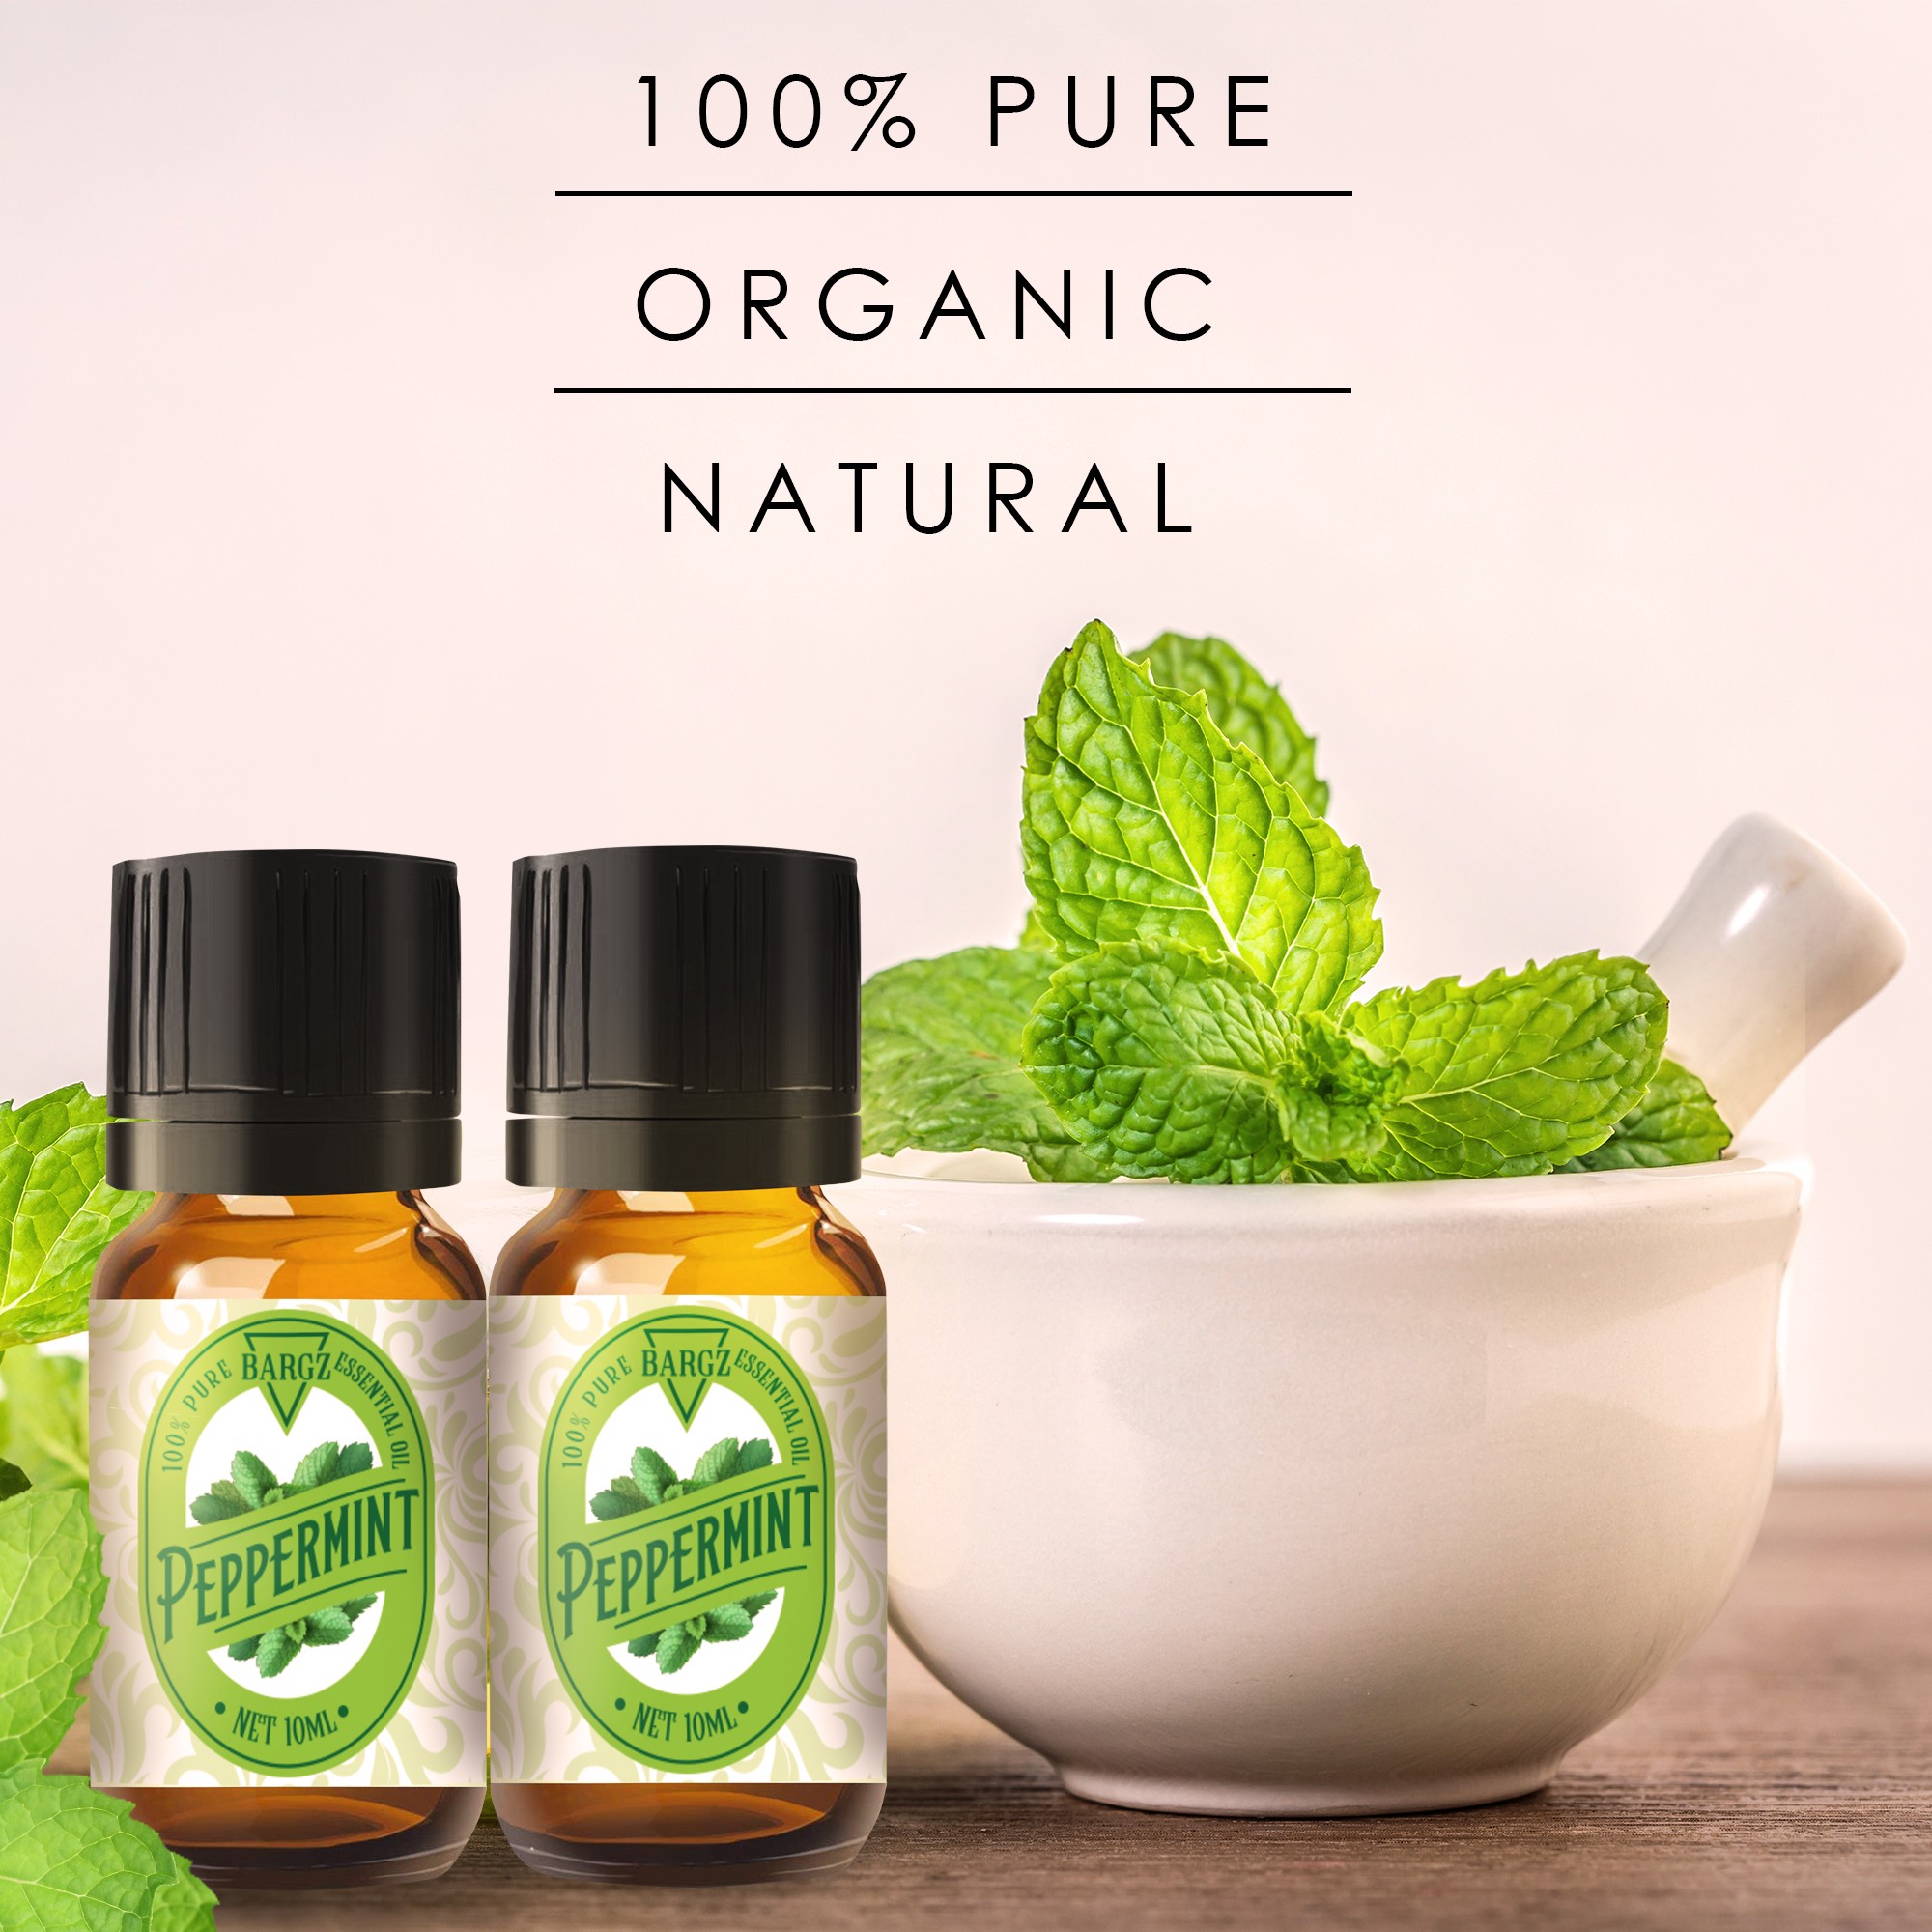 Benefits of Using Peppermint Essential Oil